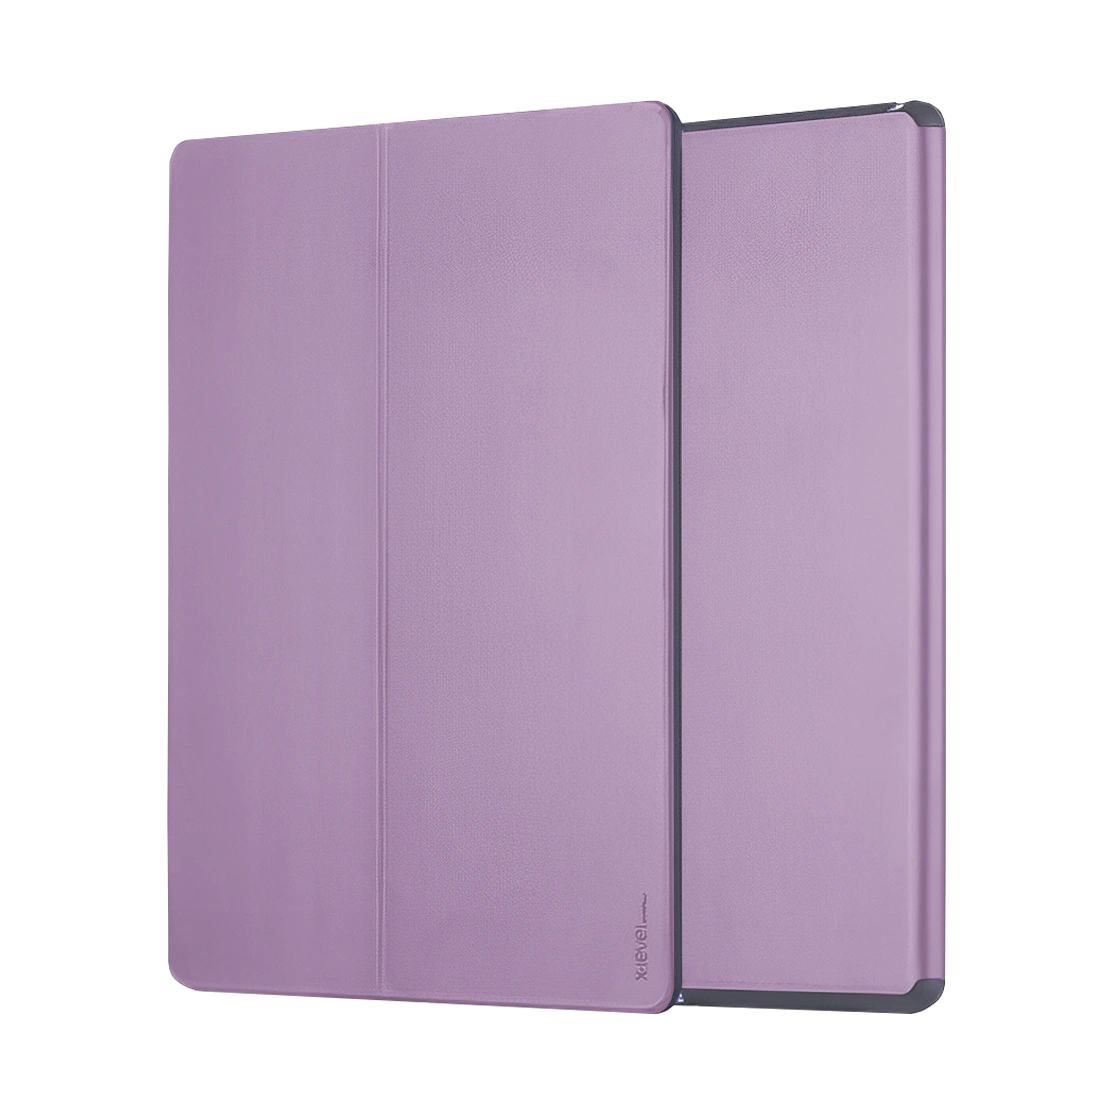 Golden Armor / XLevel Leather Protective Cover for iPad Pro 12.9inch  Pink